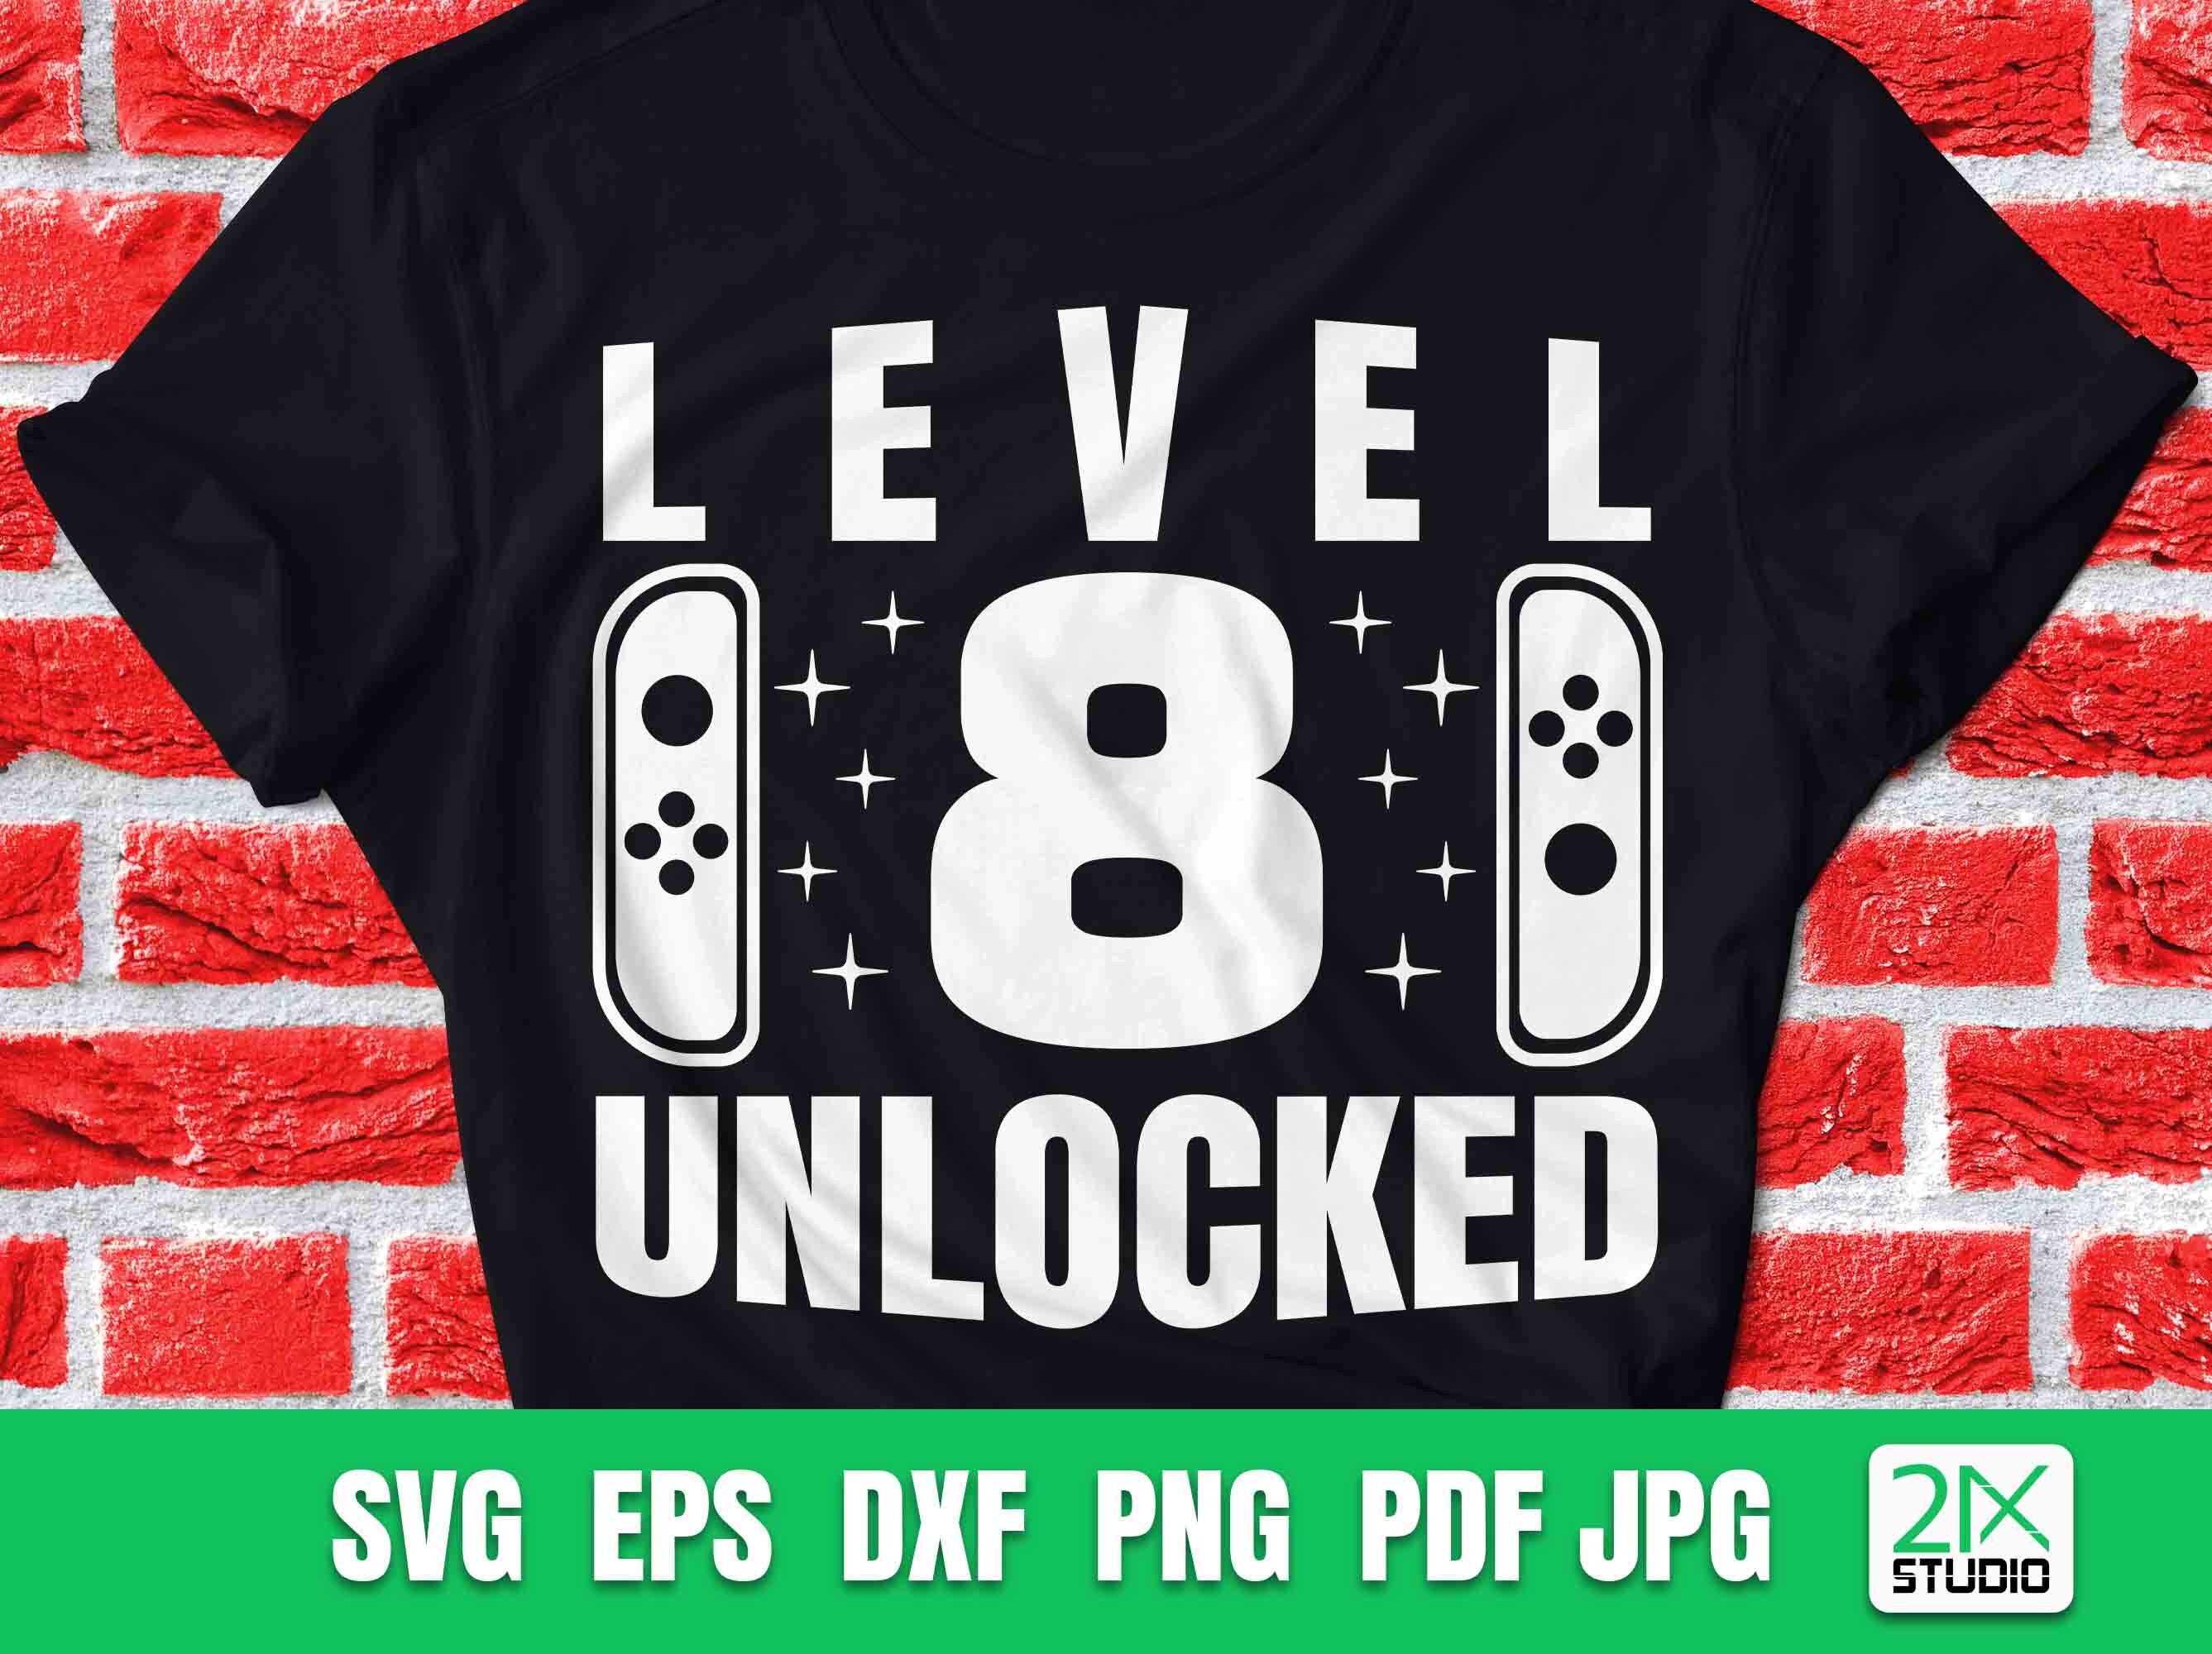 Level 8 Unlocked by Sarcastic P